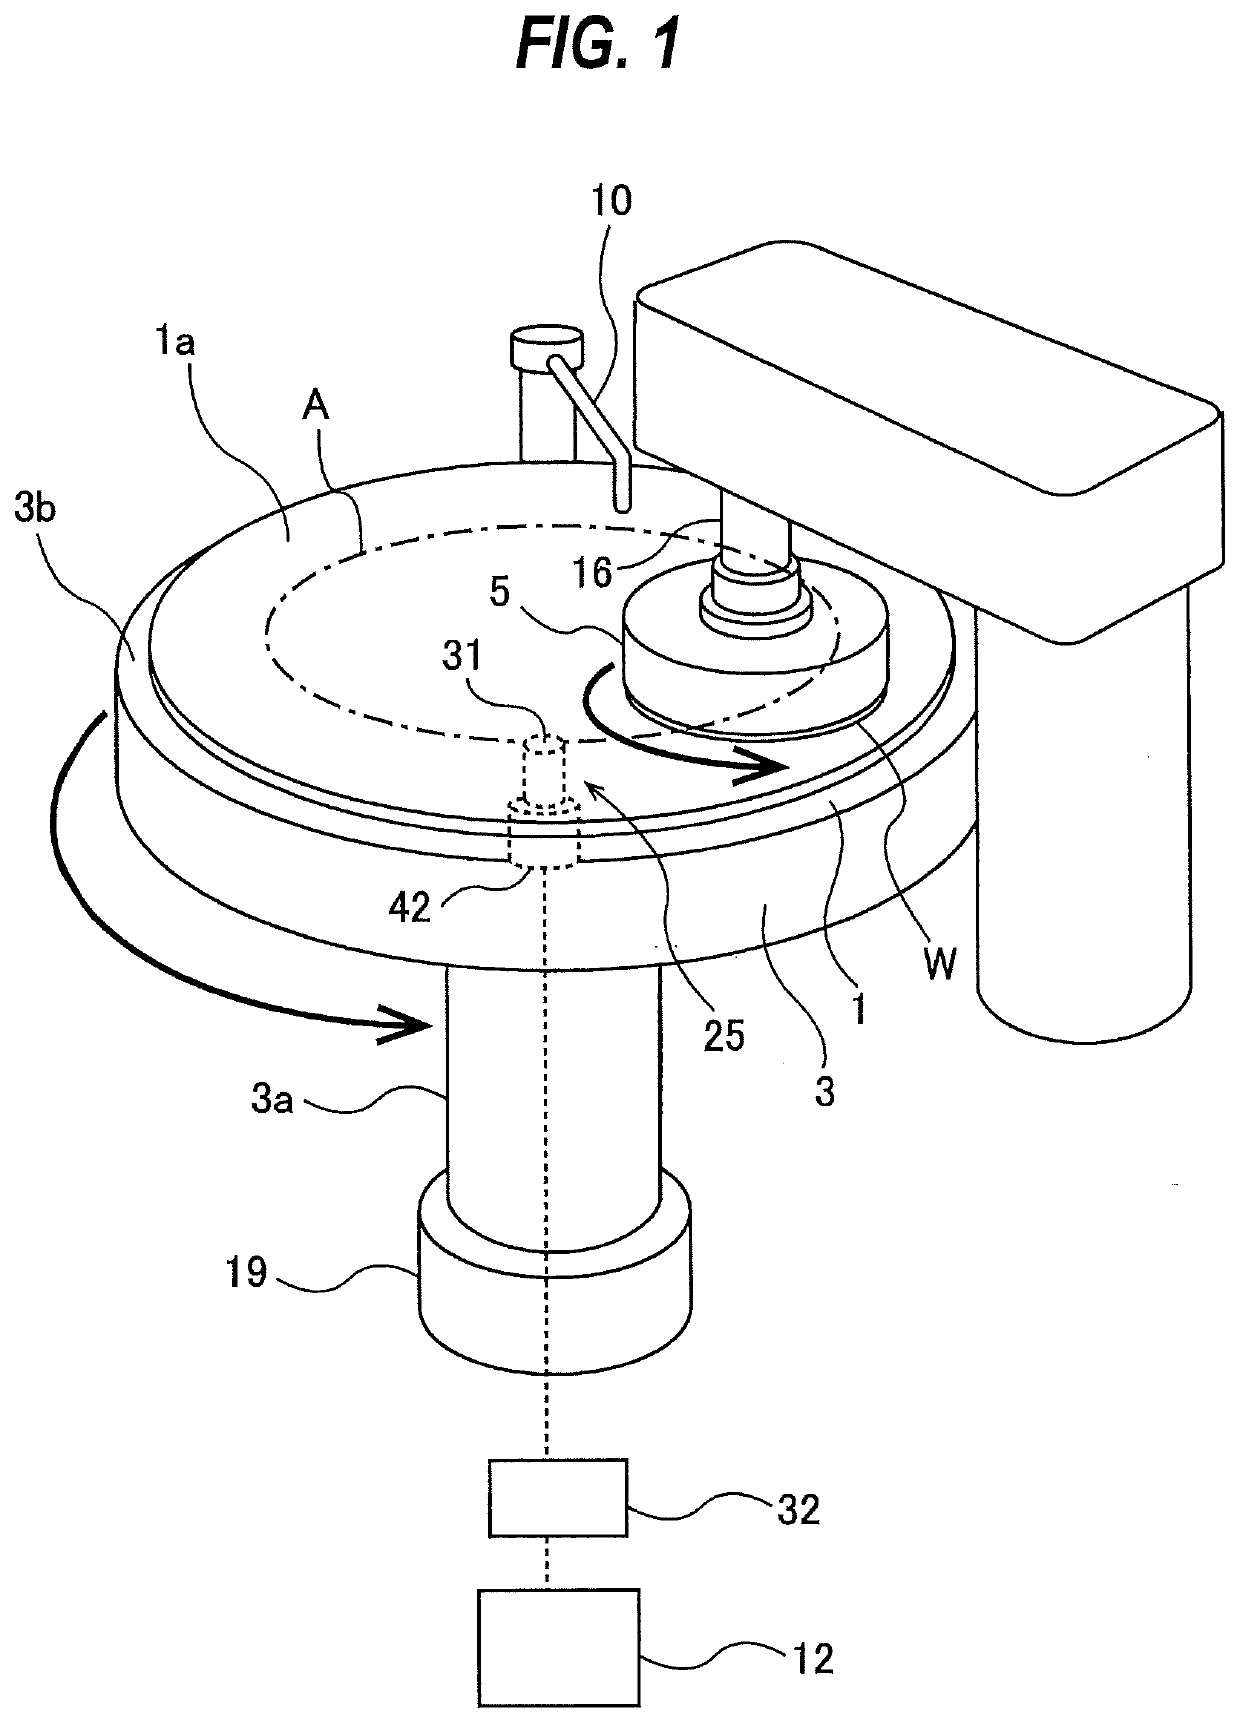 Polishing-pad laminated structure, polishing-pad positioning instrument, and method of attaching a polishing pad to a polishing table